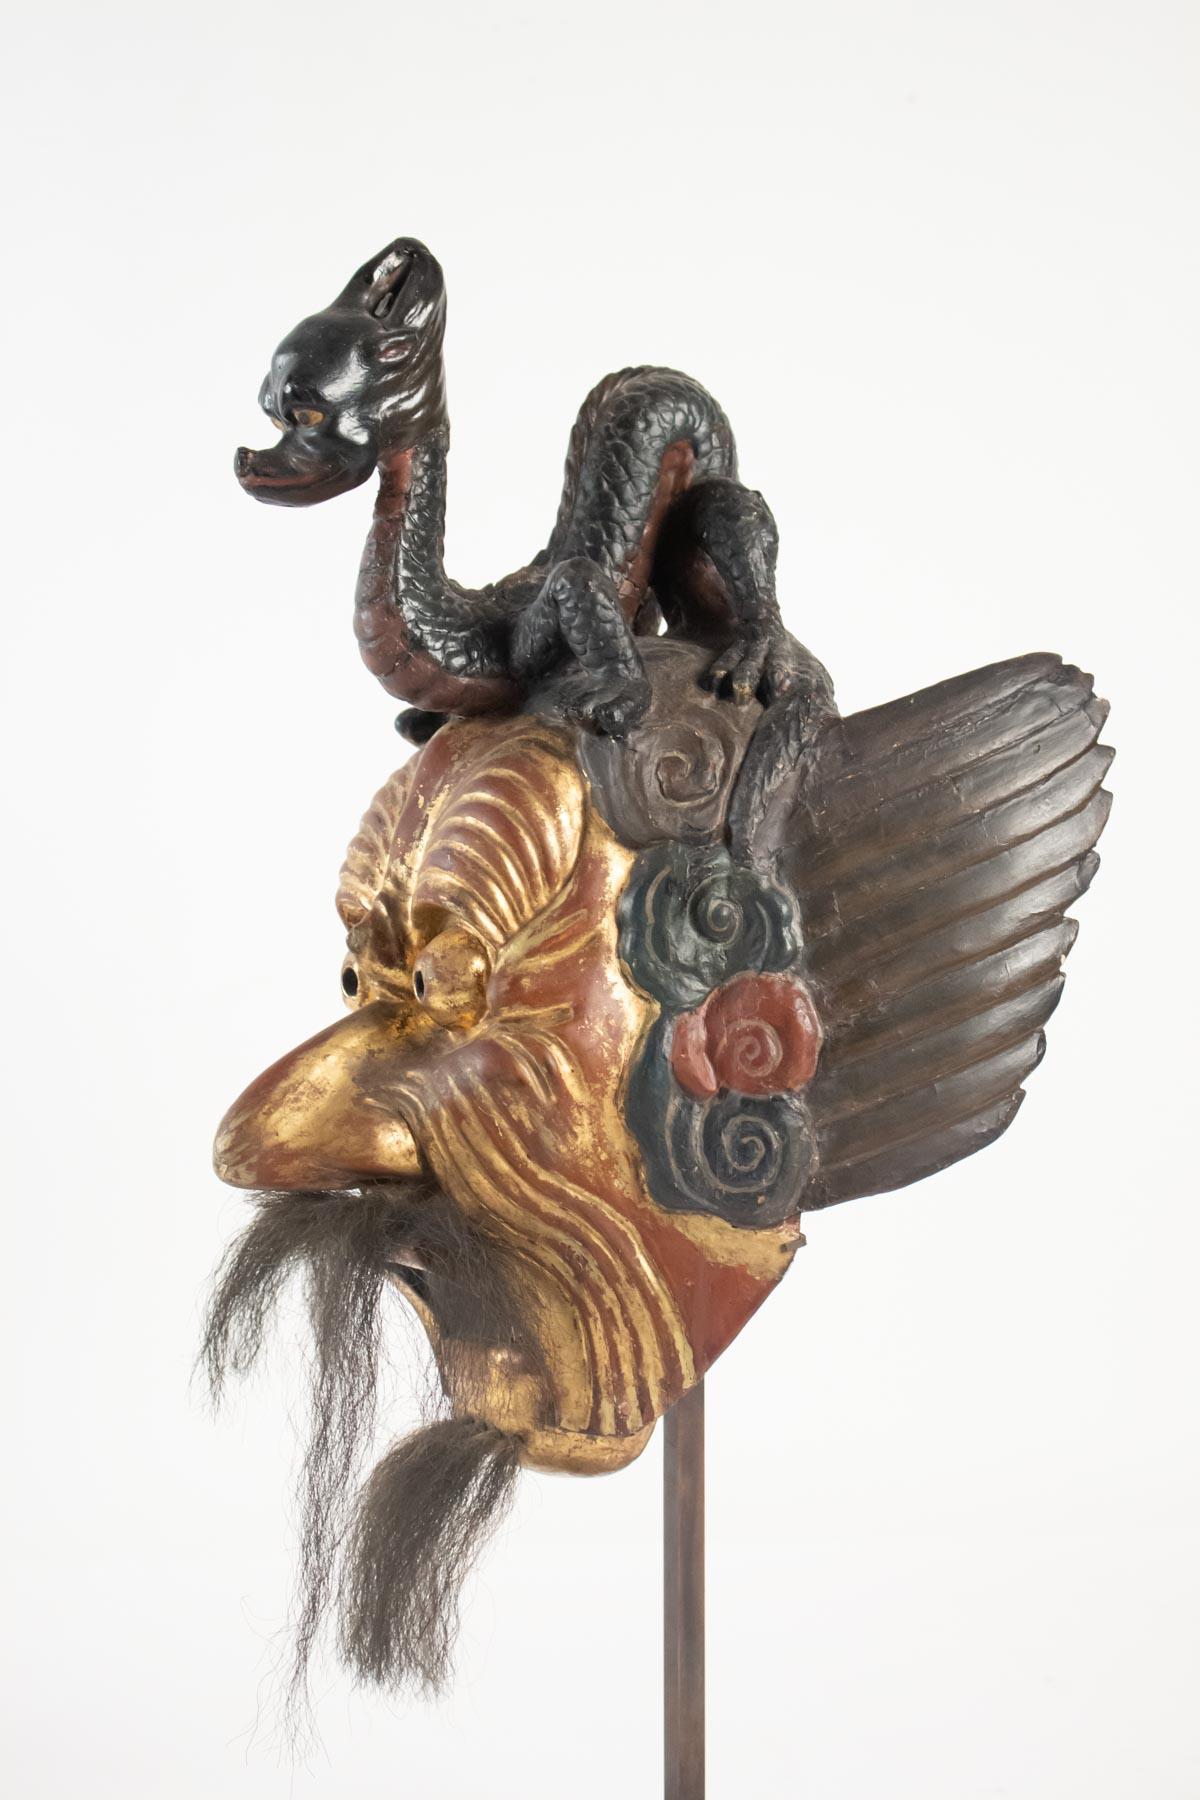 Gilded Wood Mask, Polychrome, Japan, Says of the Imperial Dance of Bugaku Dances 1